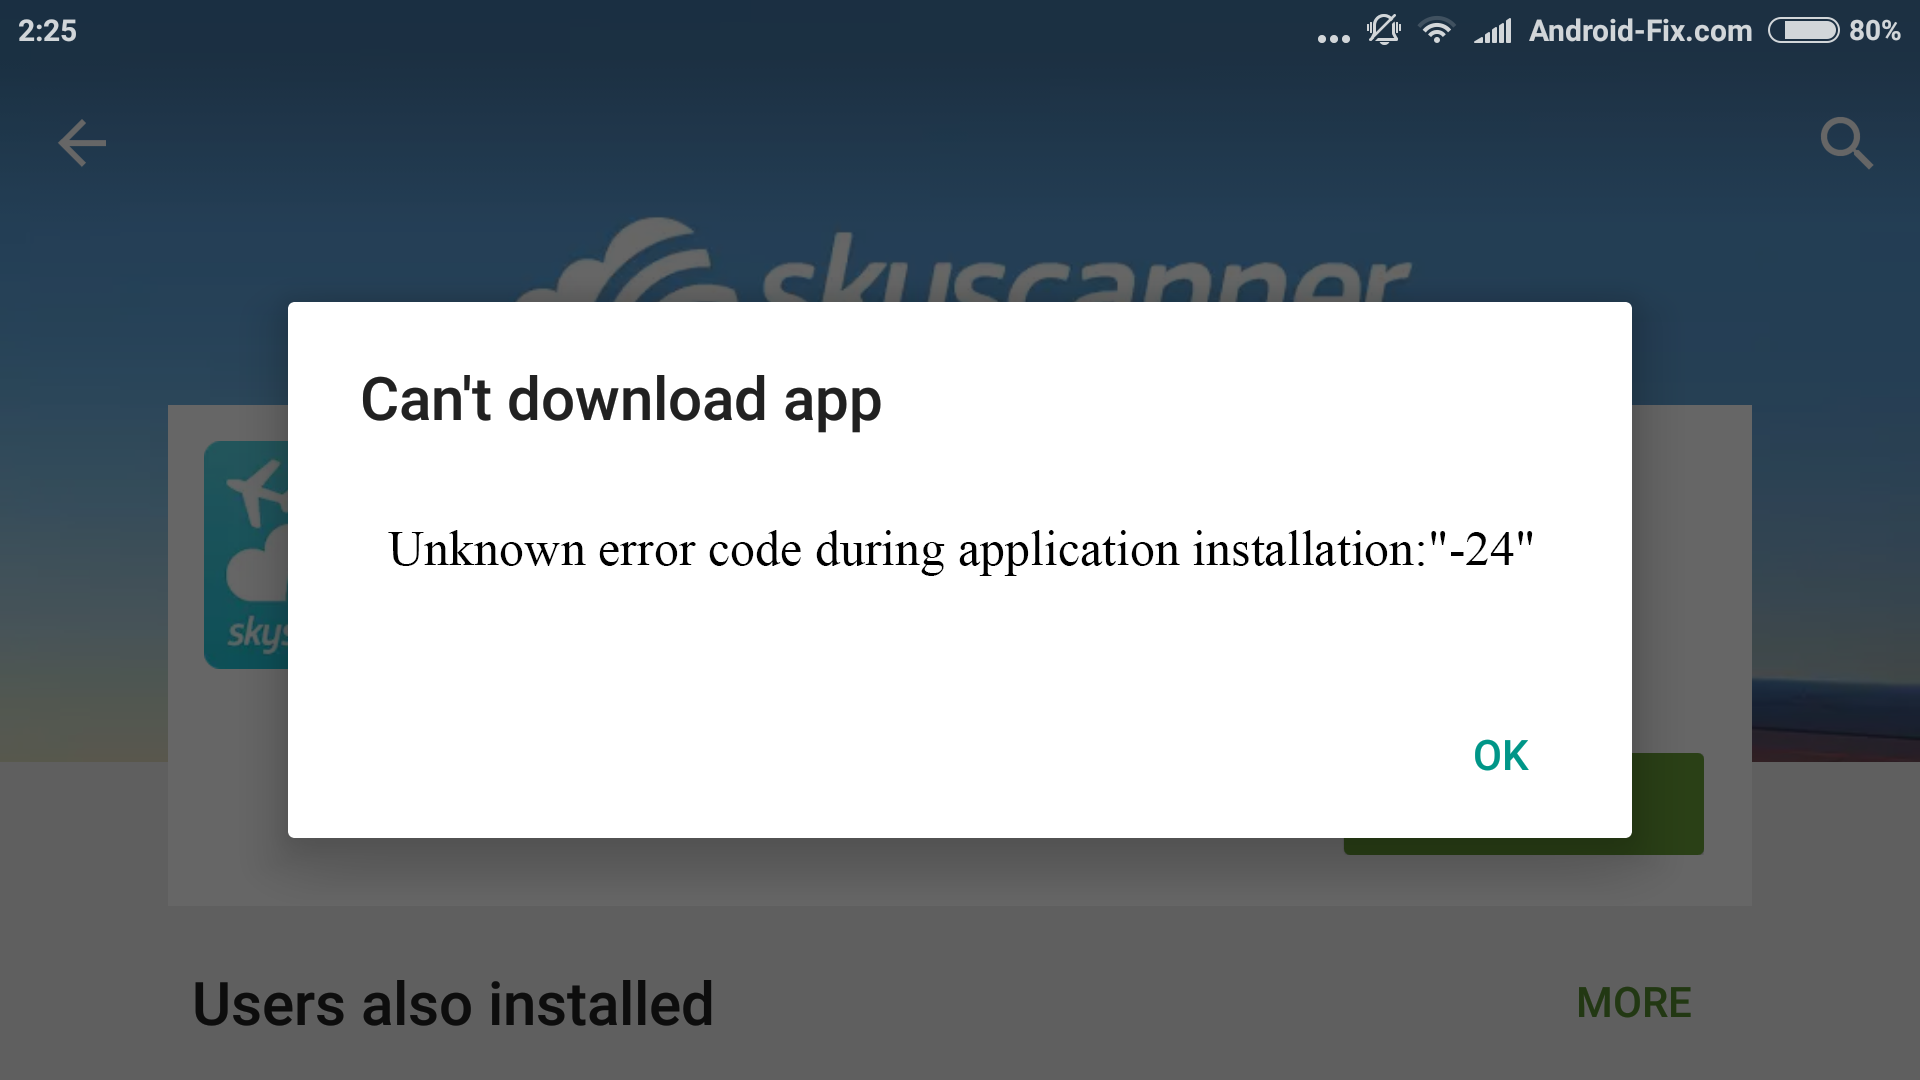 Google Play "ошибка сервера". Руфус ошибка could not retrieve Architectures from Server. Error: retrieving GPG Key timed out.. Reinstalling the application may fix this problem